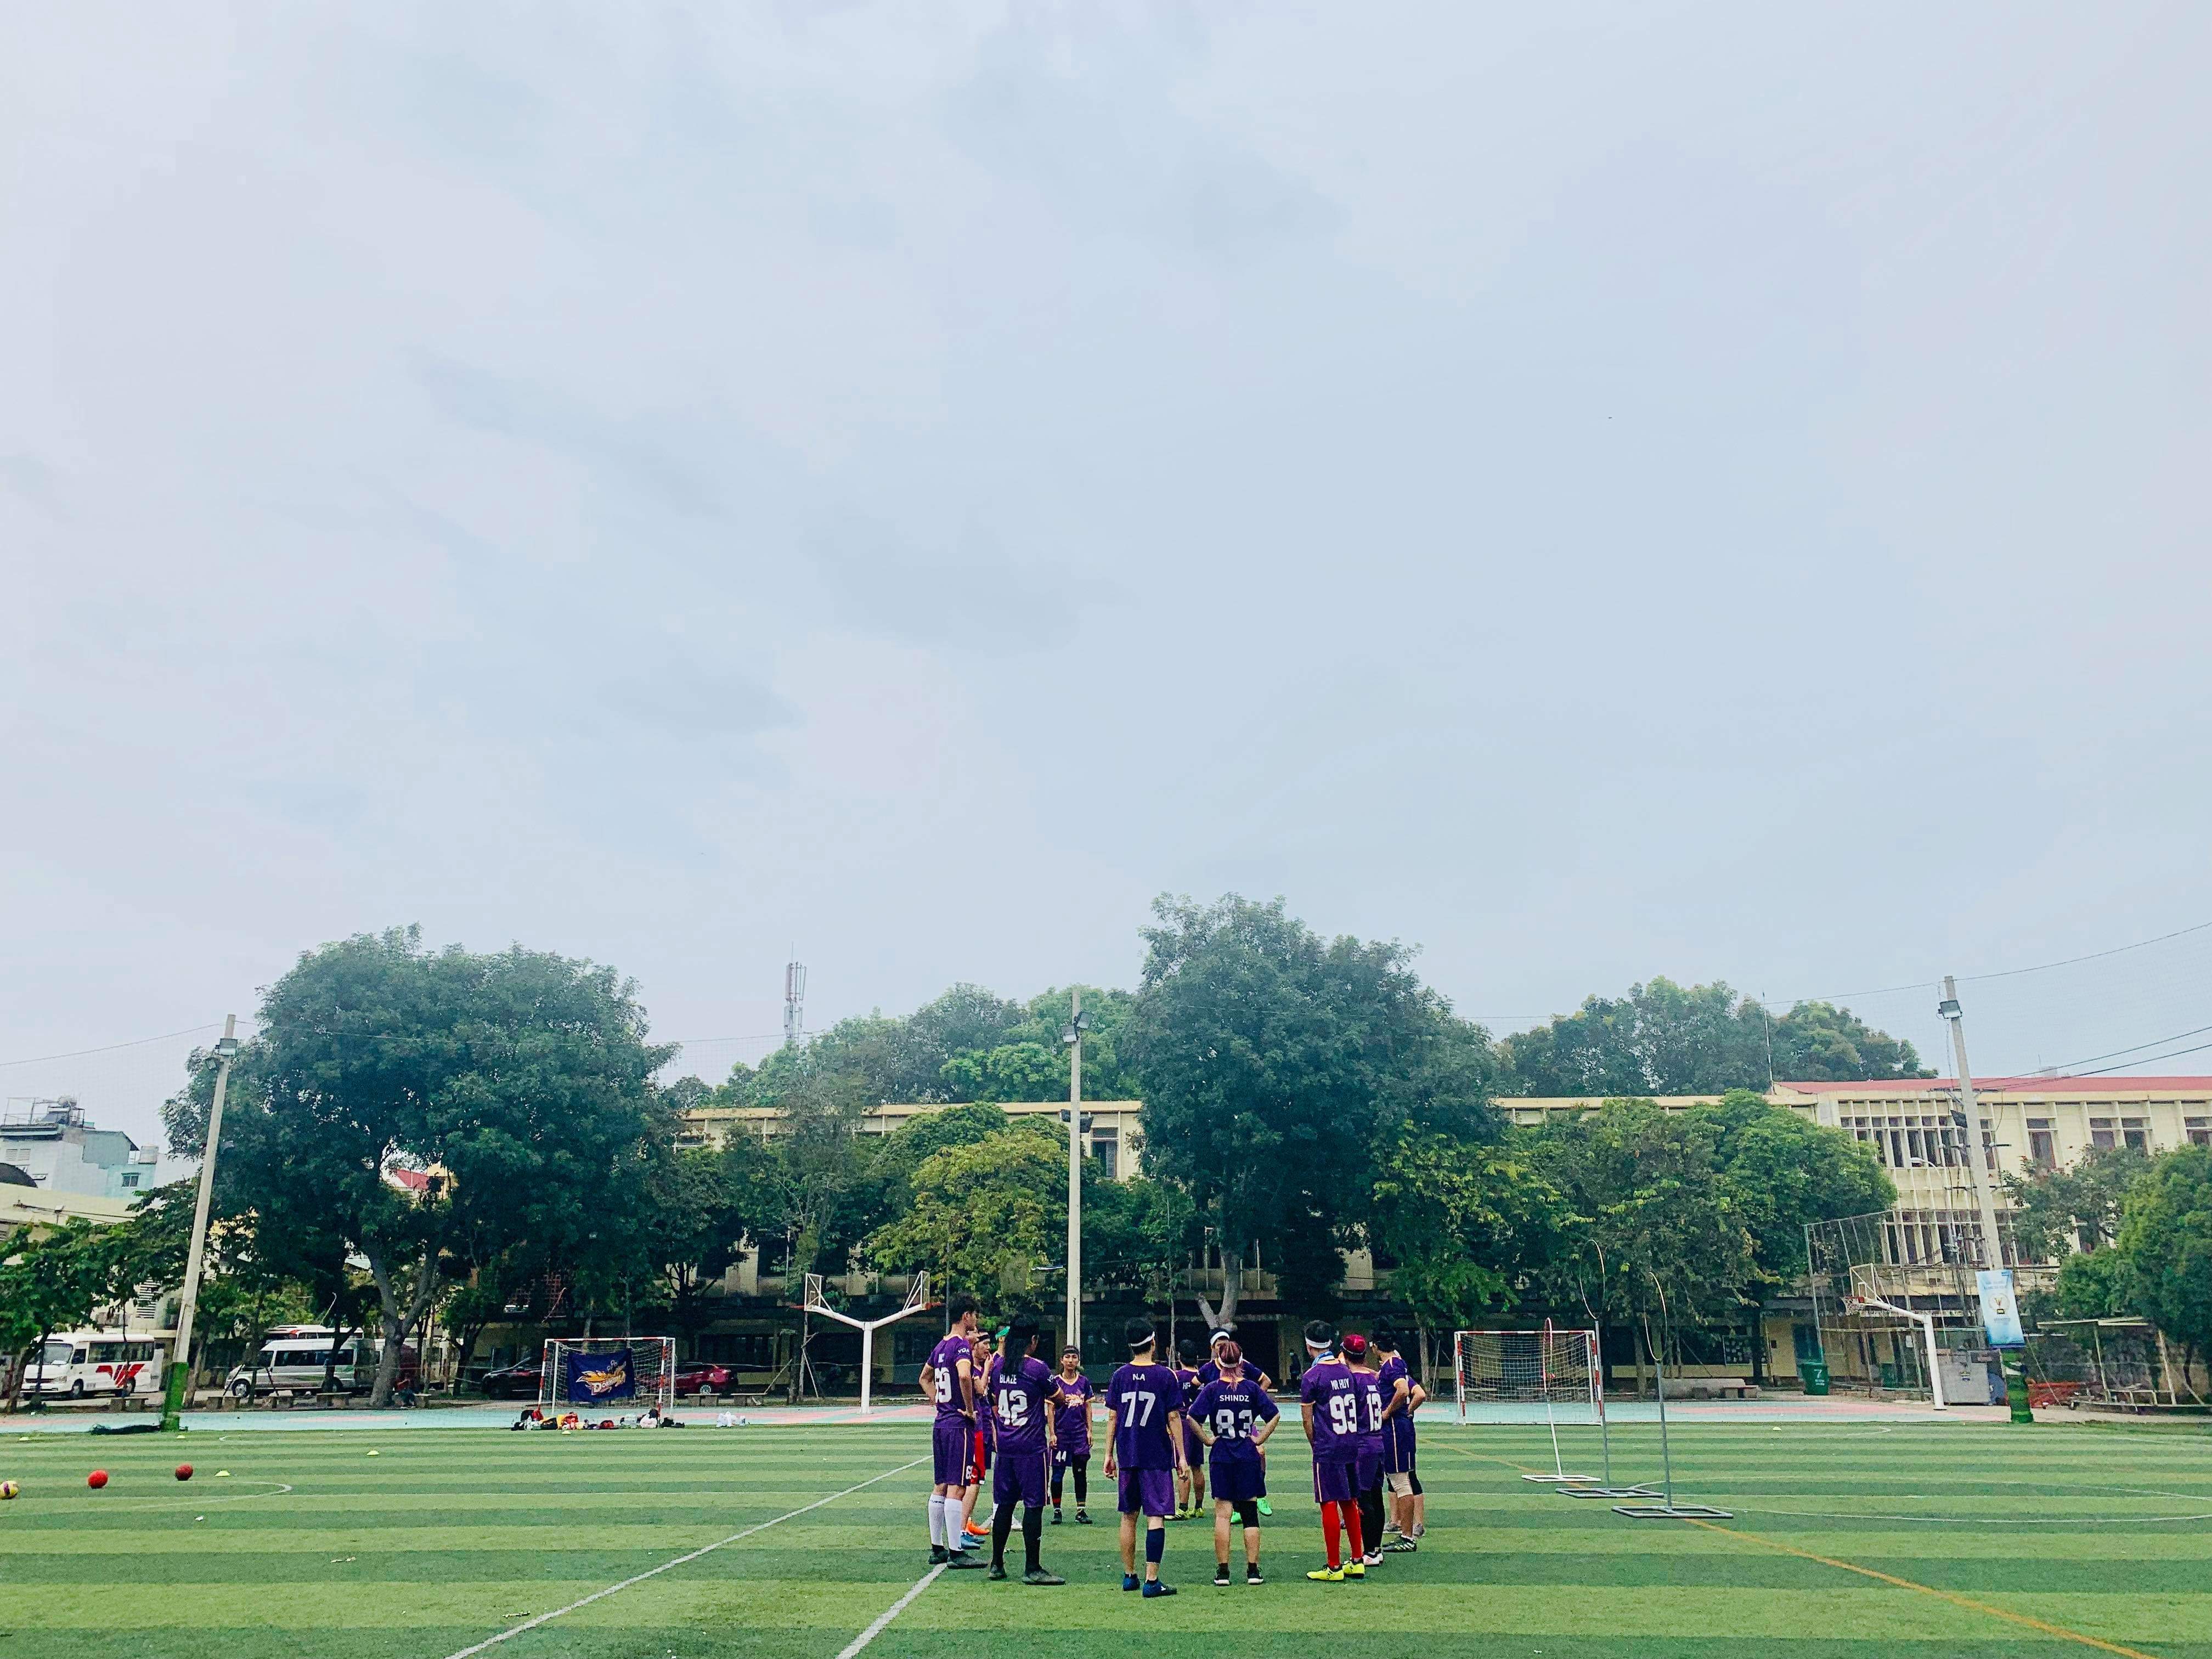 A team discuss before a match in the maiden Vietnam Quidditch Cup organized by the Vietnam Quidditch Association  in Tan Binh District, Ho Chi Minh City, November 10, 2019 in this provided photo